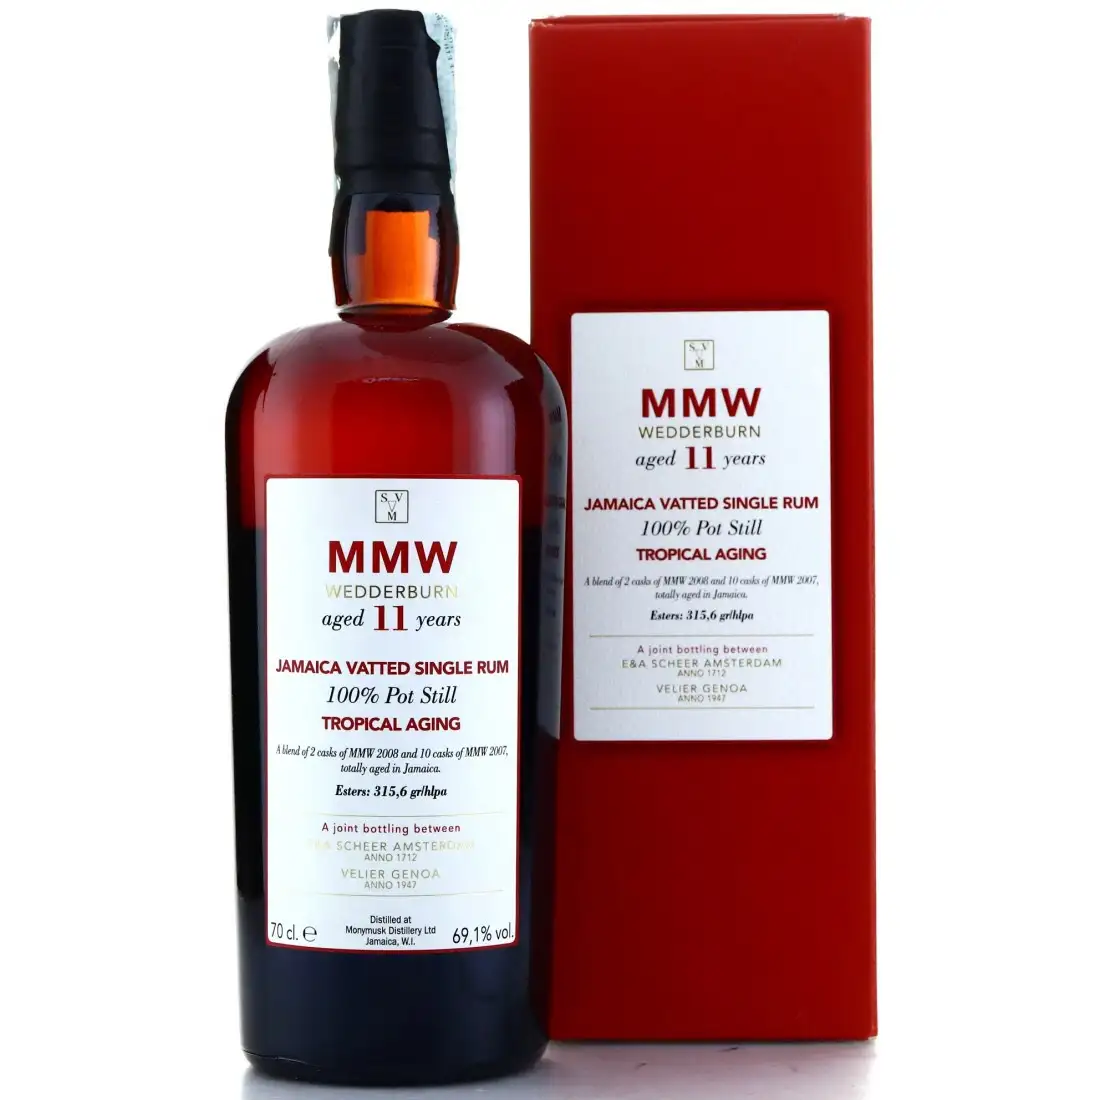 Image of the front of the bottle of the rum Wedderburn Tropical Aging MMW